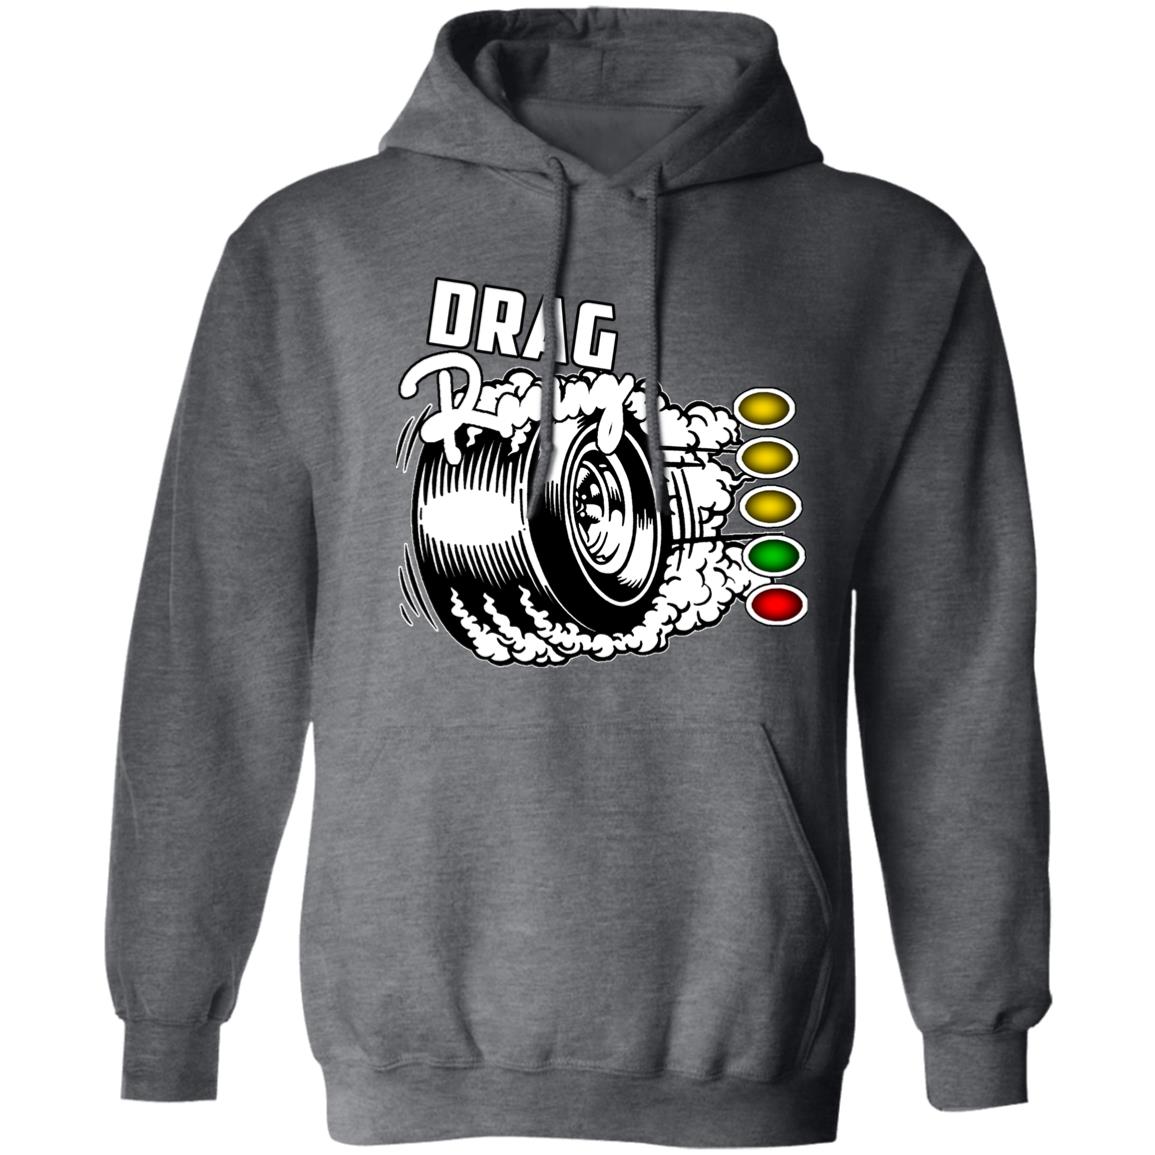 Drag Racing Pullover Hoodie 8 oz (Closeout)